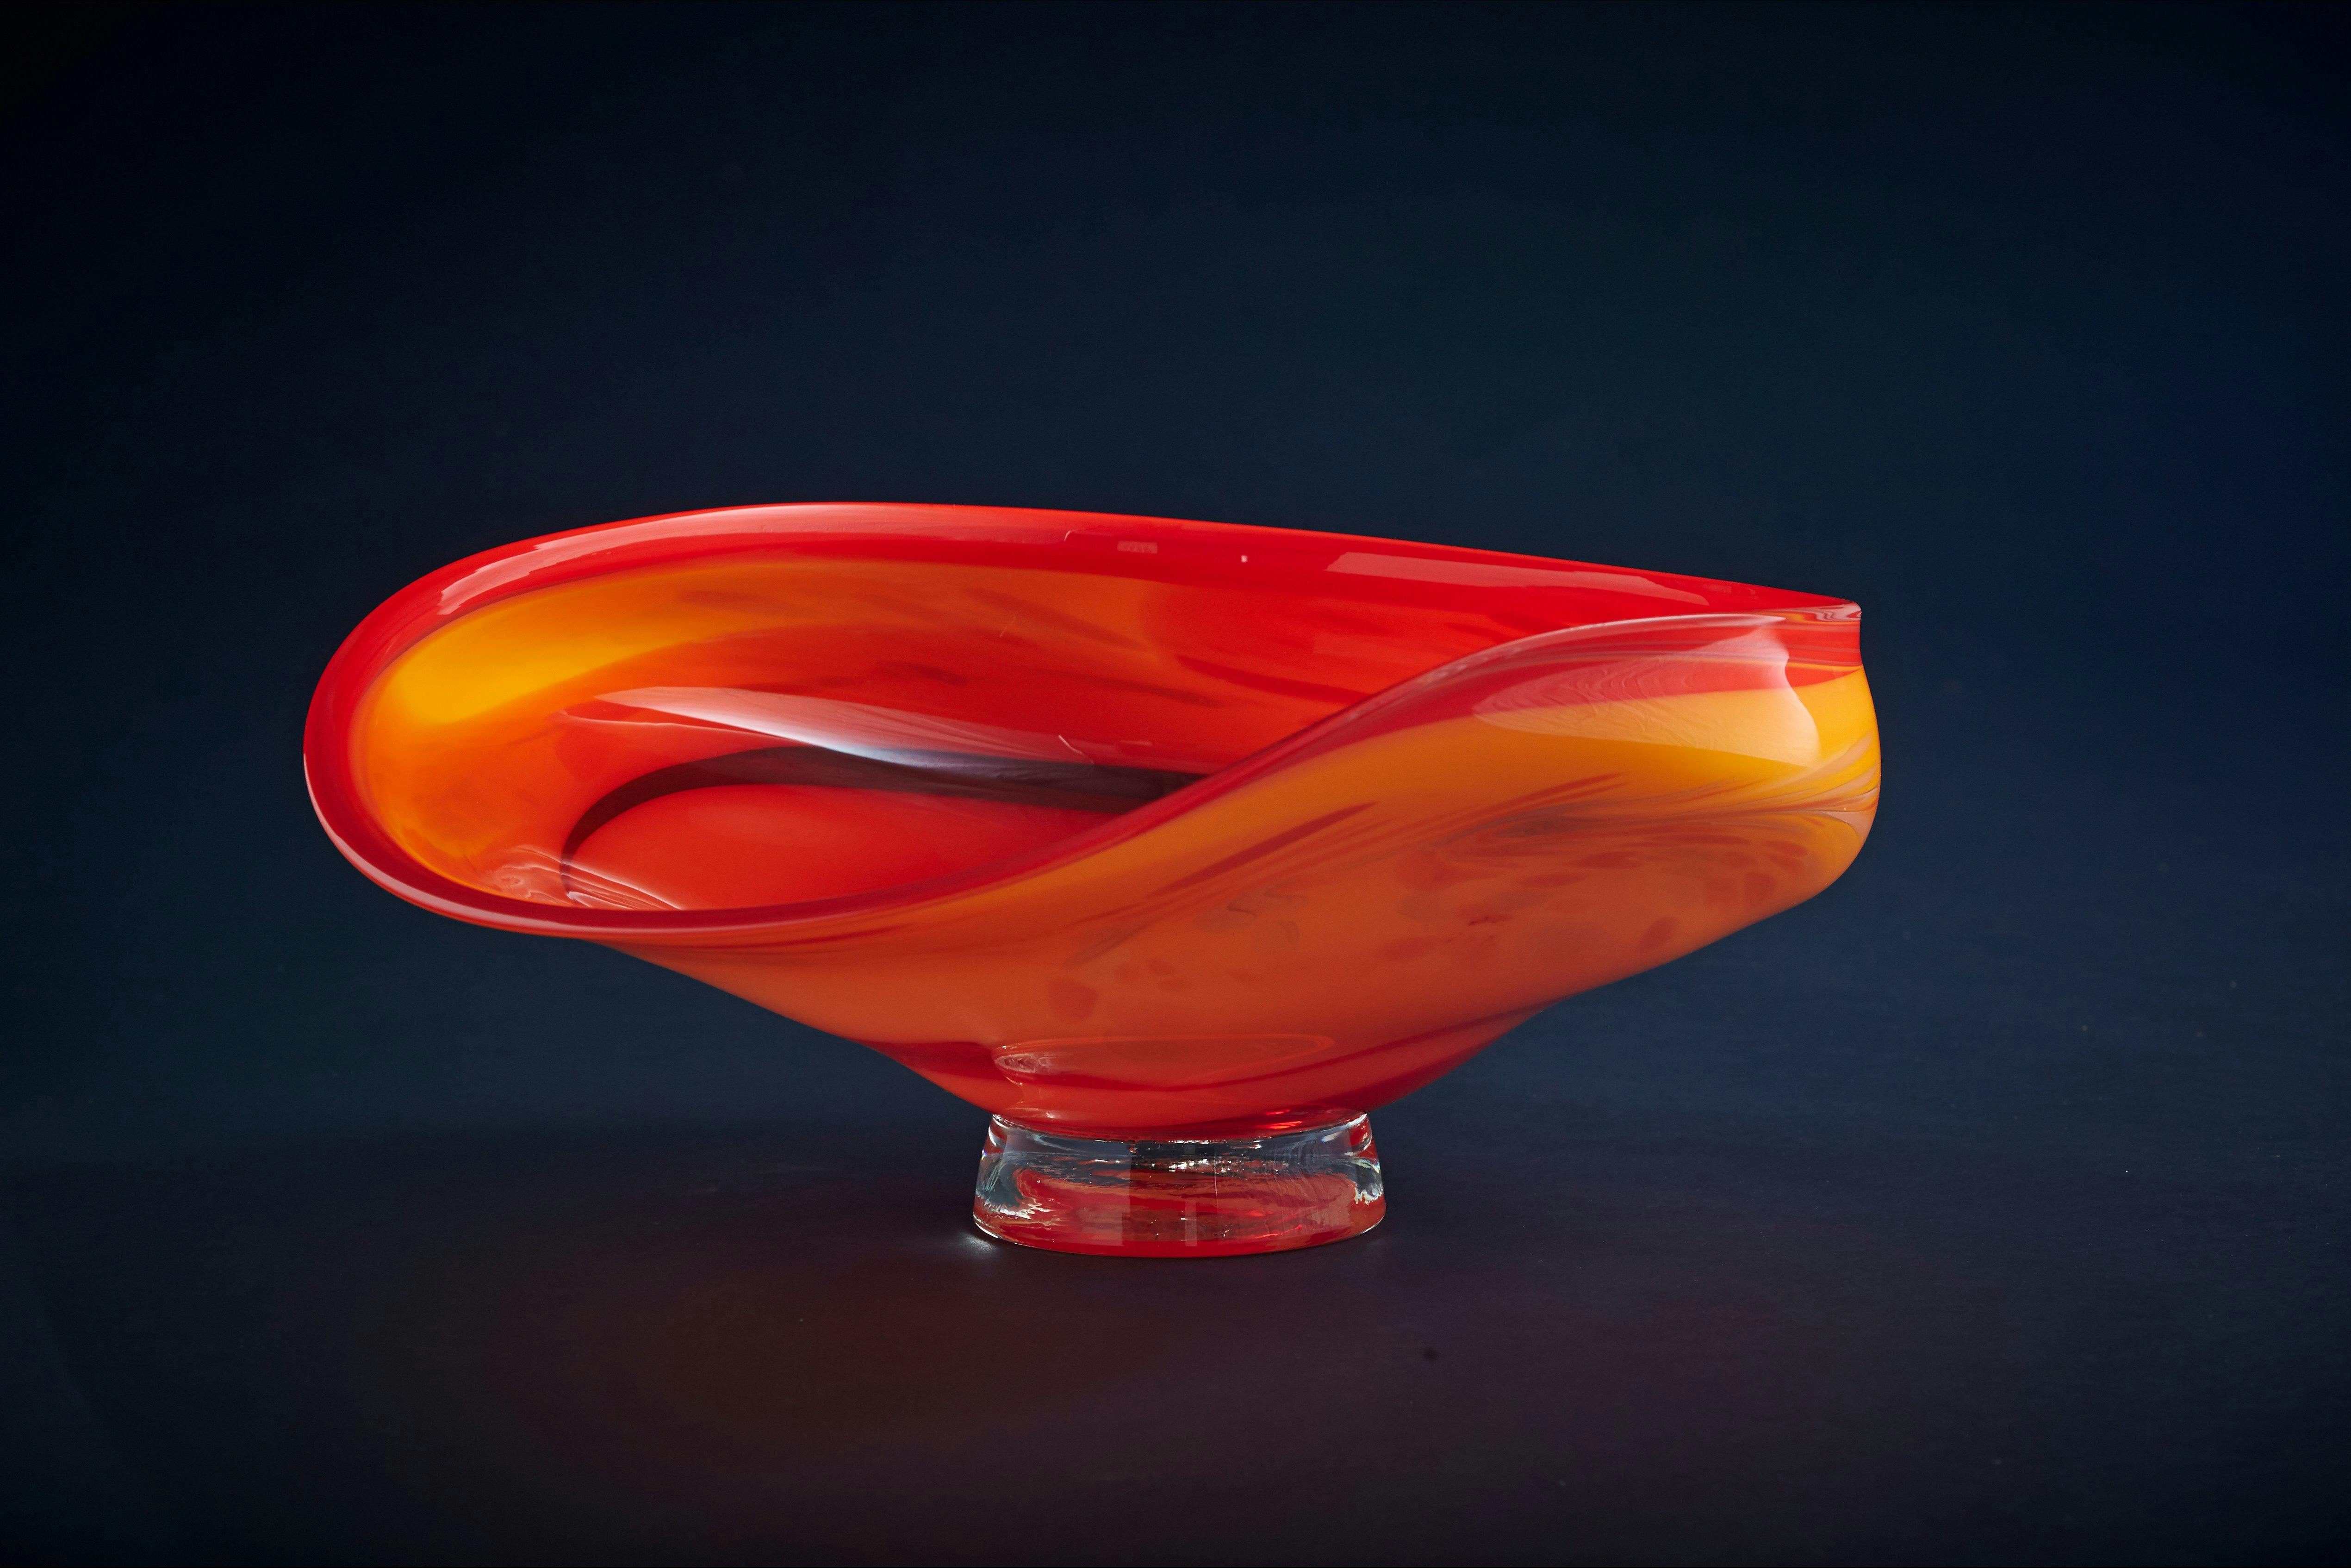 James McMurtrie's  Glass Blowing Studio and Gallery